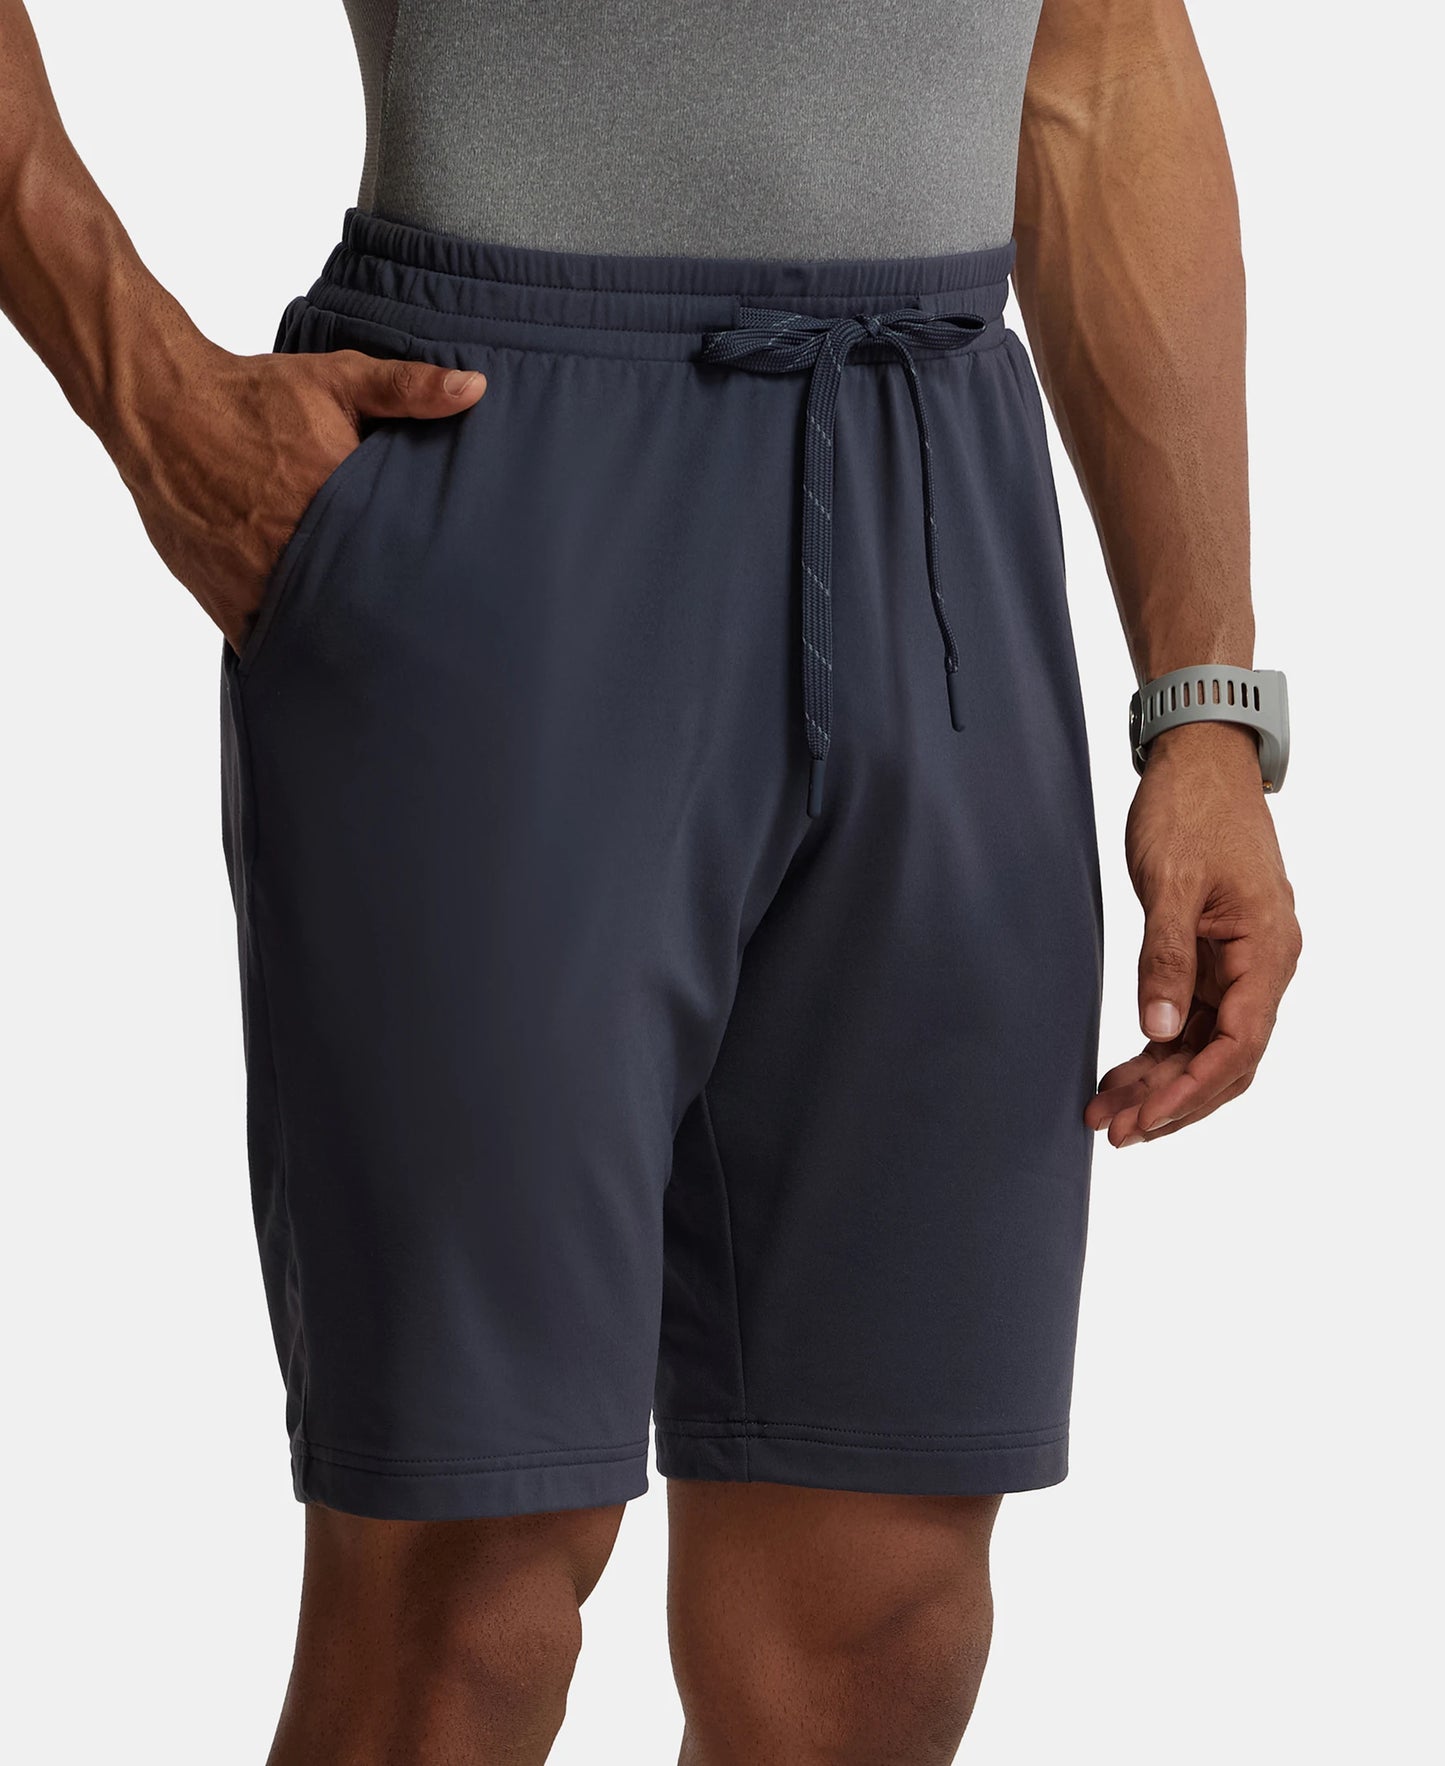 Soft Touch Microfiber Elastane Stretch Shorts with Back Zipper Pocket and StayFresh Treatment - Graphite-2